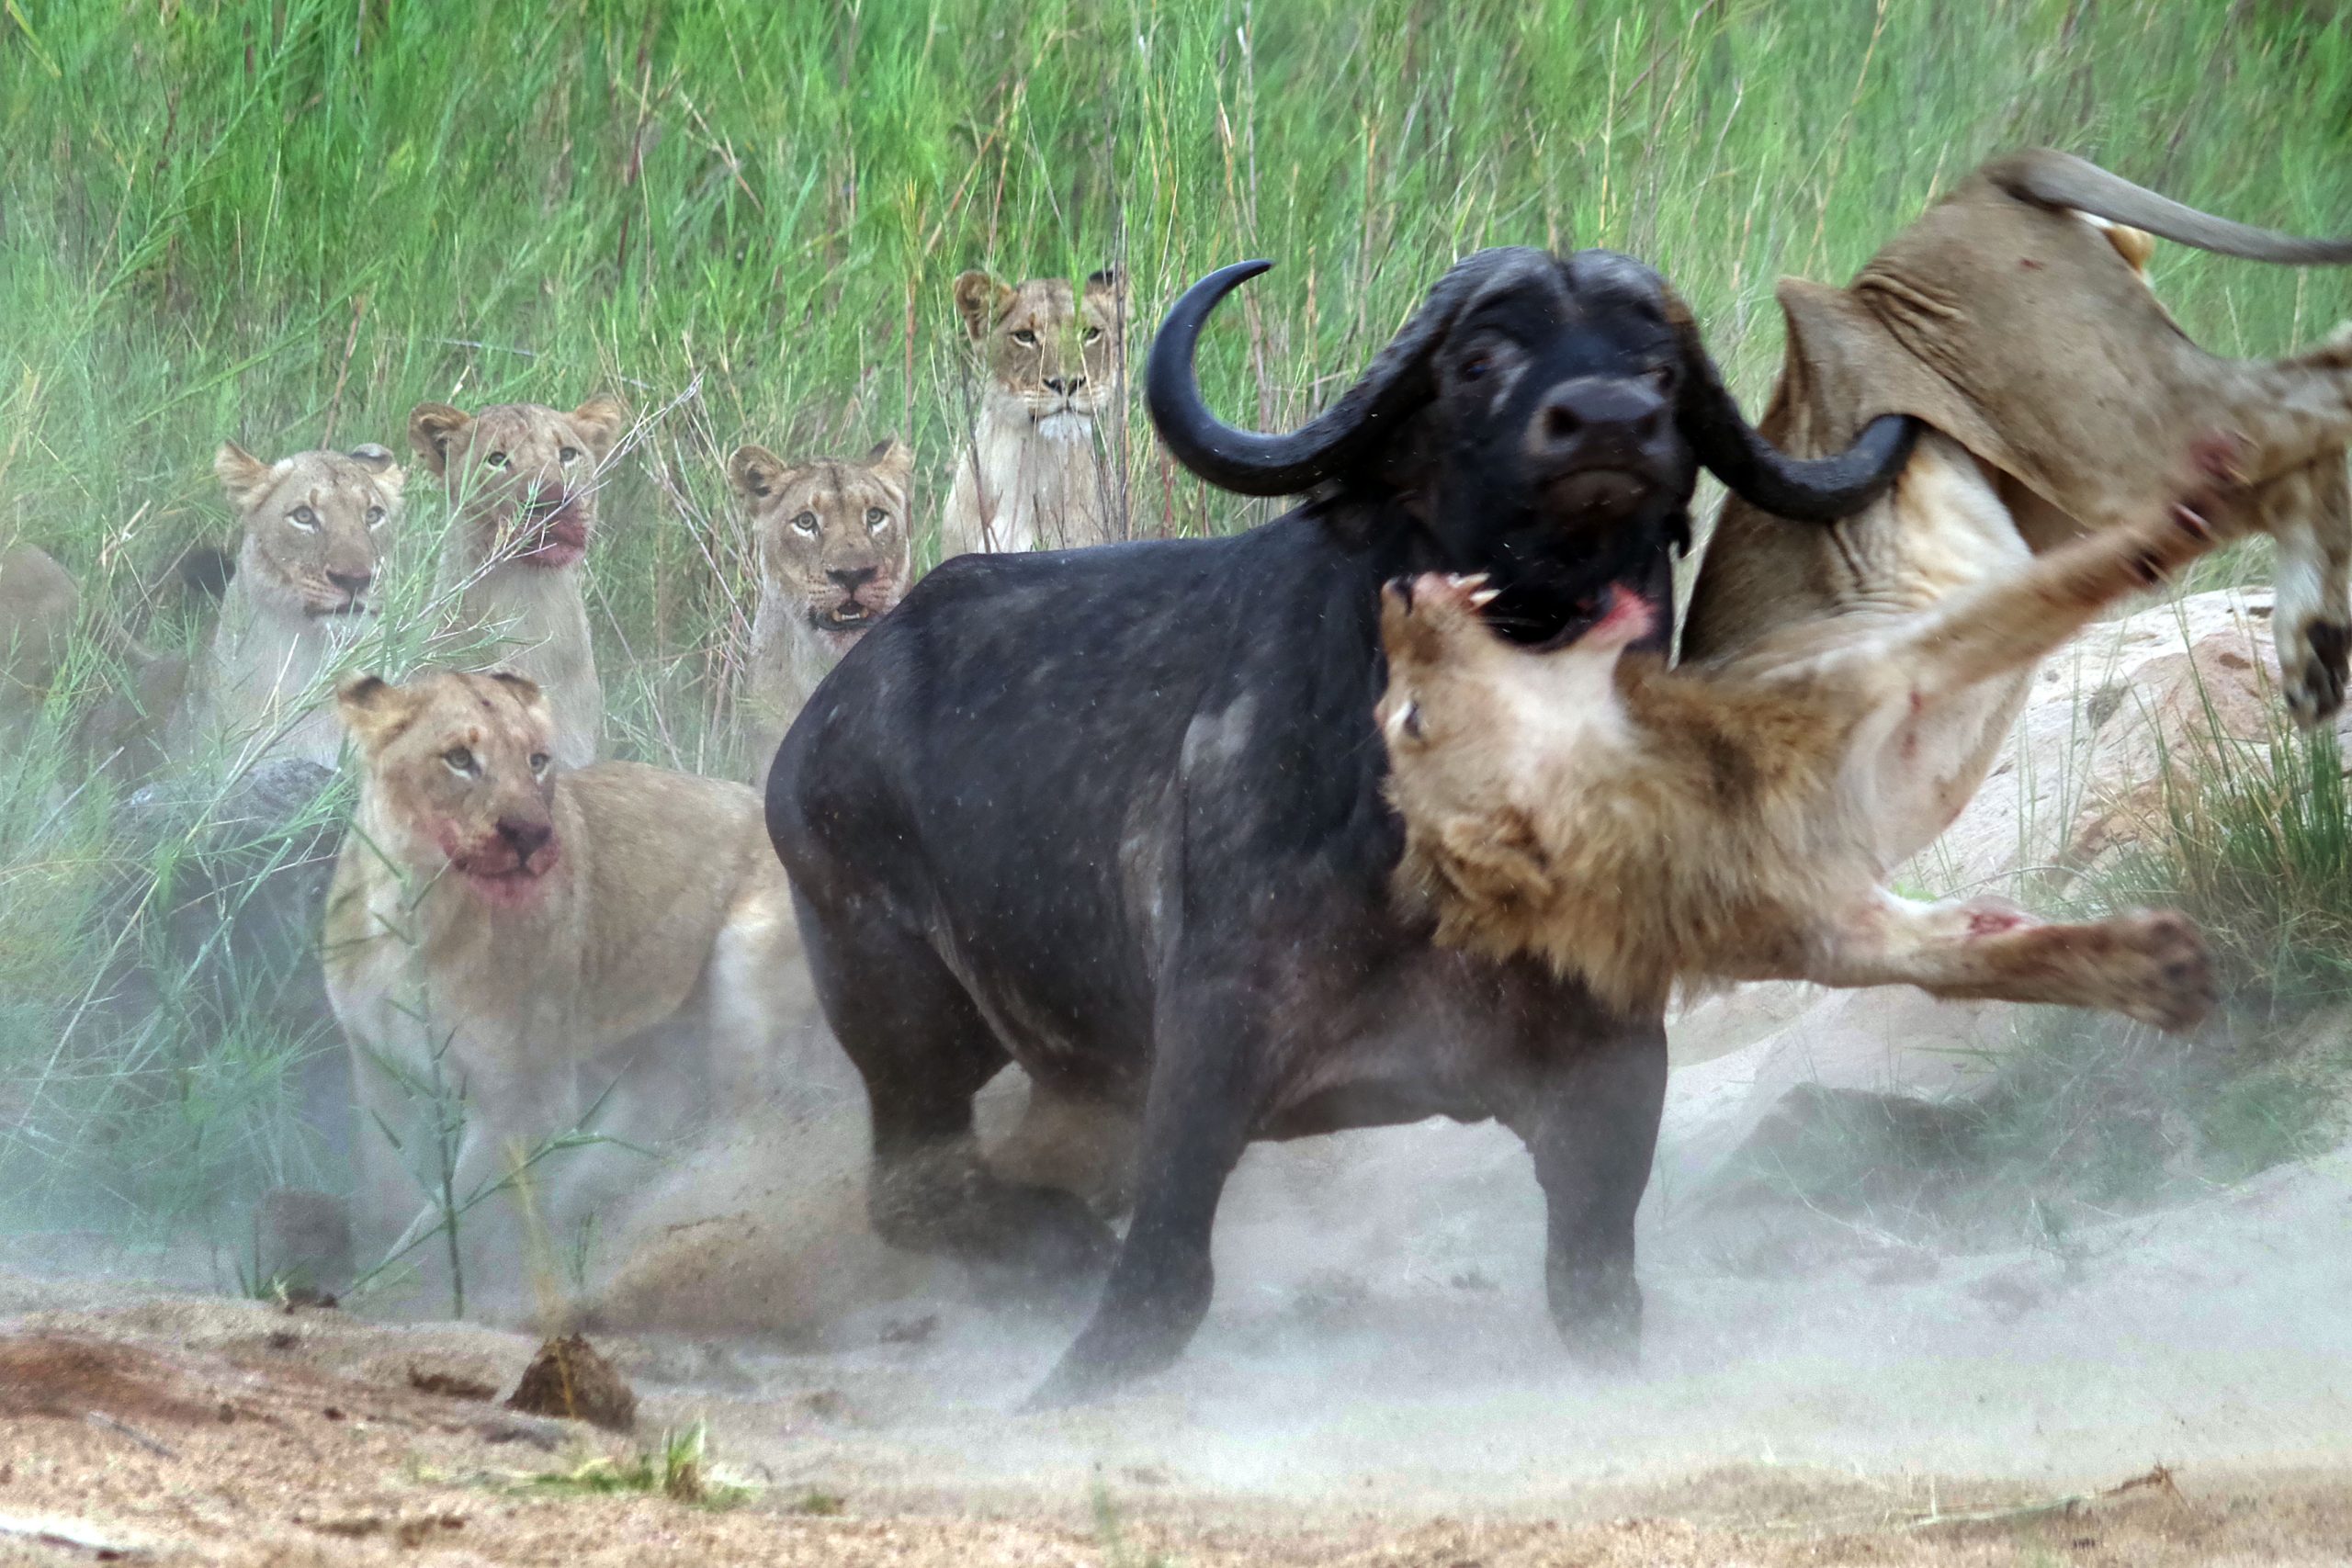 Lions vs. Buffaloes, Predators and Prey Face Off in the wild